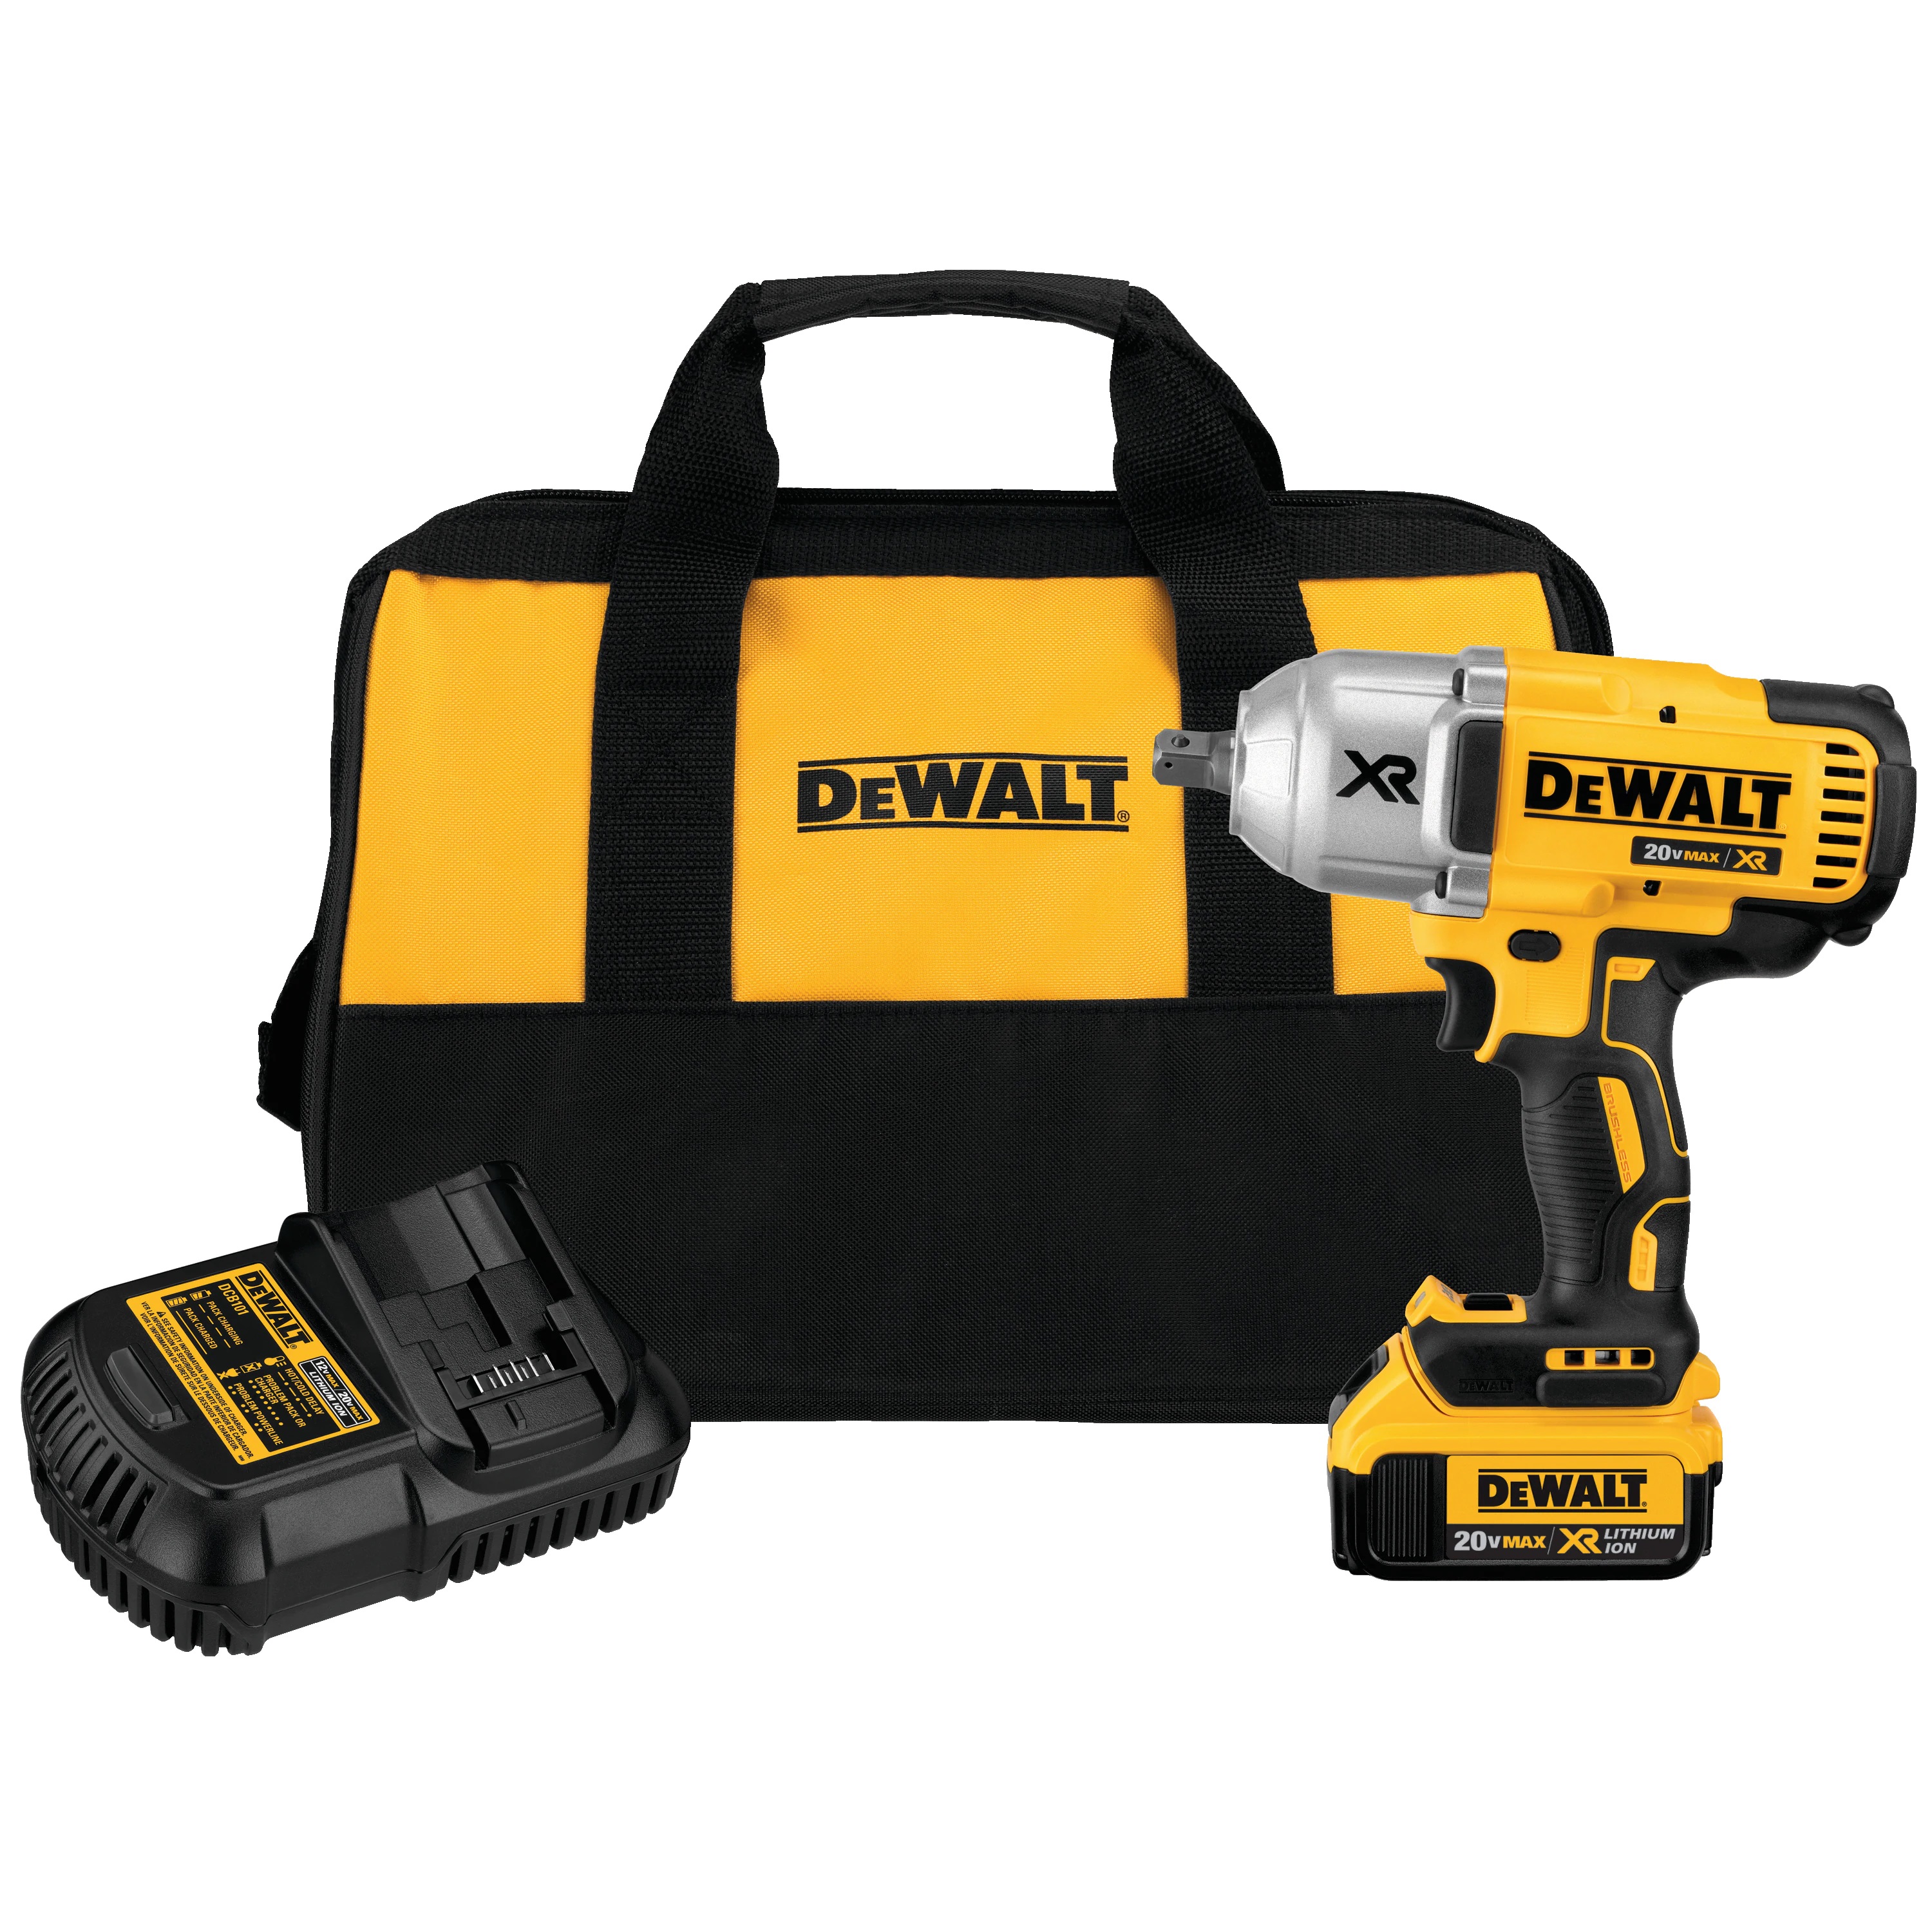 DeWalt 20v MAX* XR Brushless High Torque 1/2in Impact Wrench with Dentent Pin Anvil (4.0 Ah) - Drills